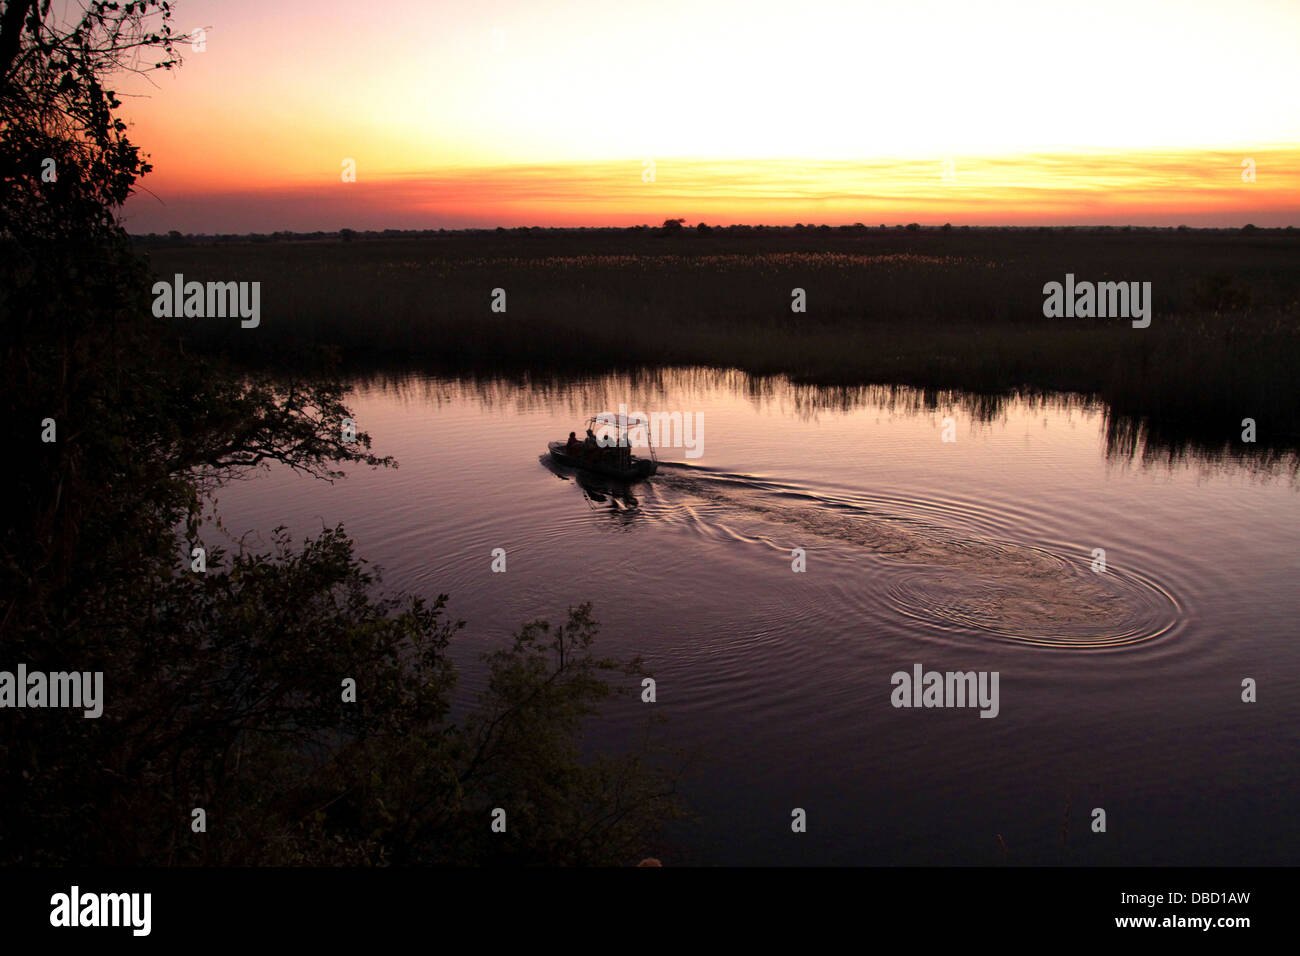 Game Viewing on the Kwando River at sunset. Stock Photo